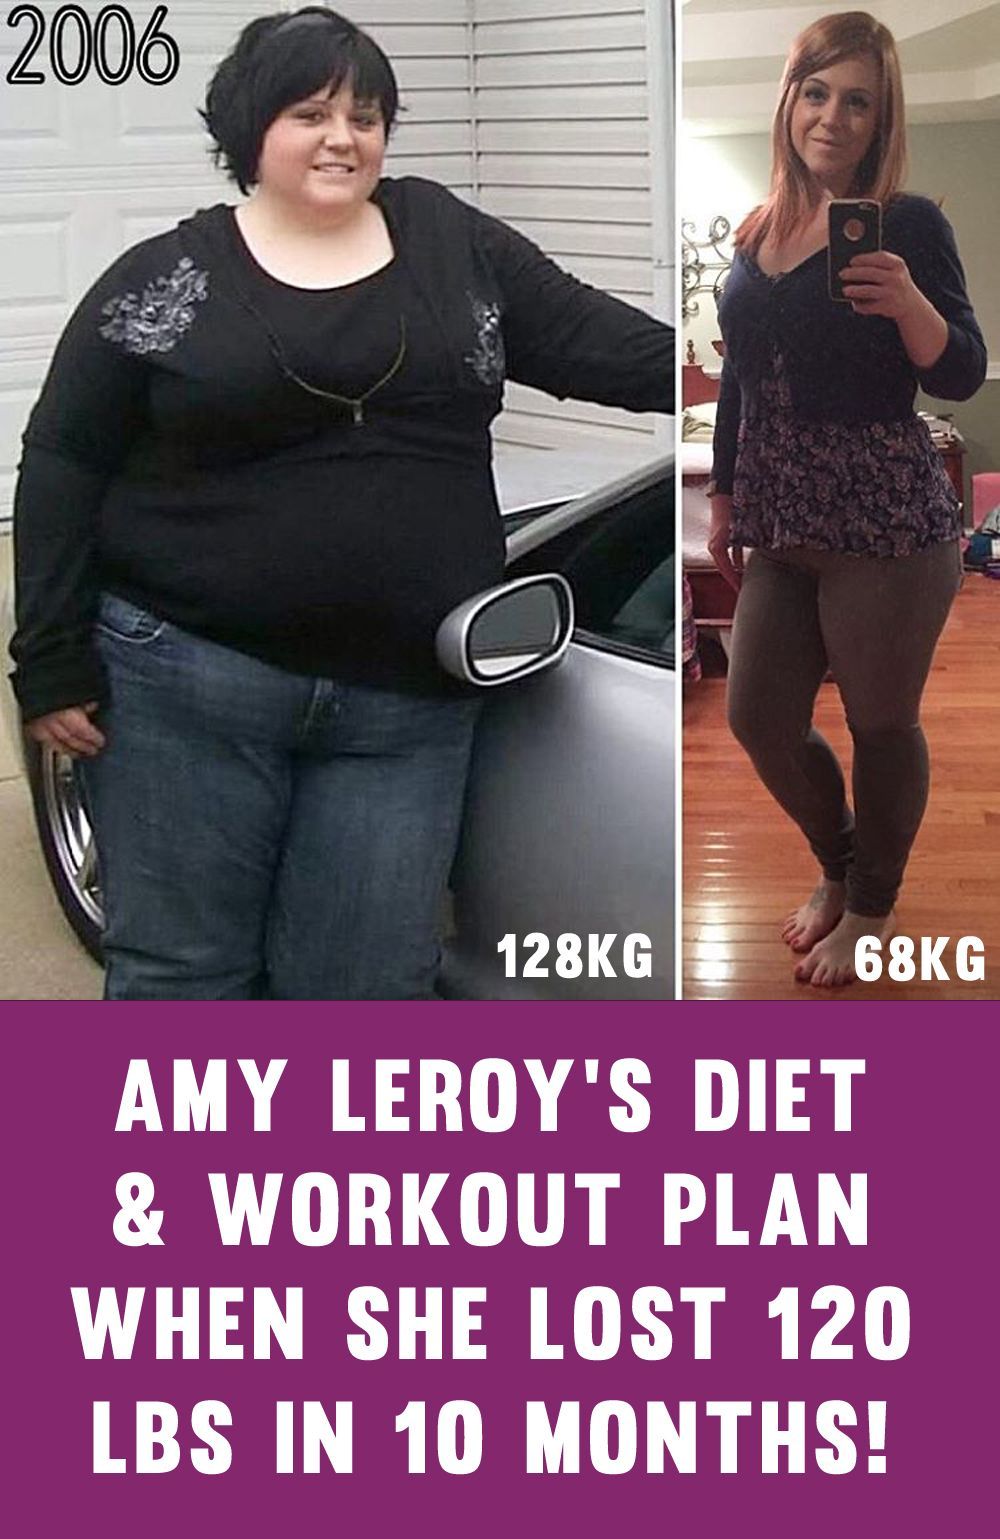 Amy LeRoy’s Full Training & Diet Plan For Losing 120lbs In 10 Months!